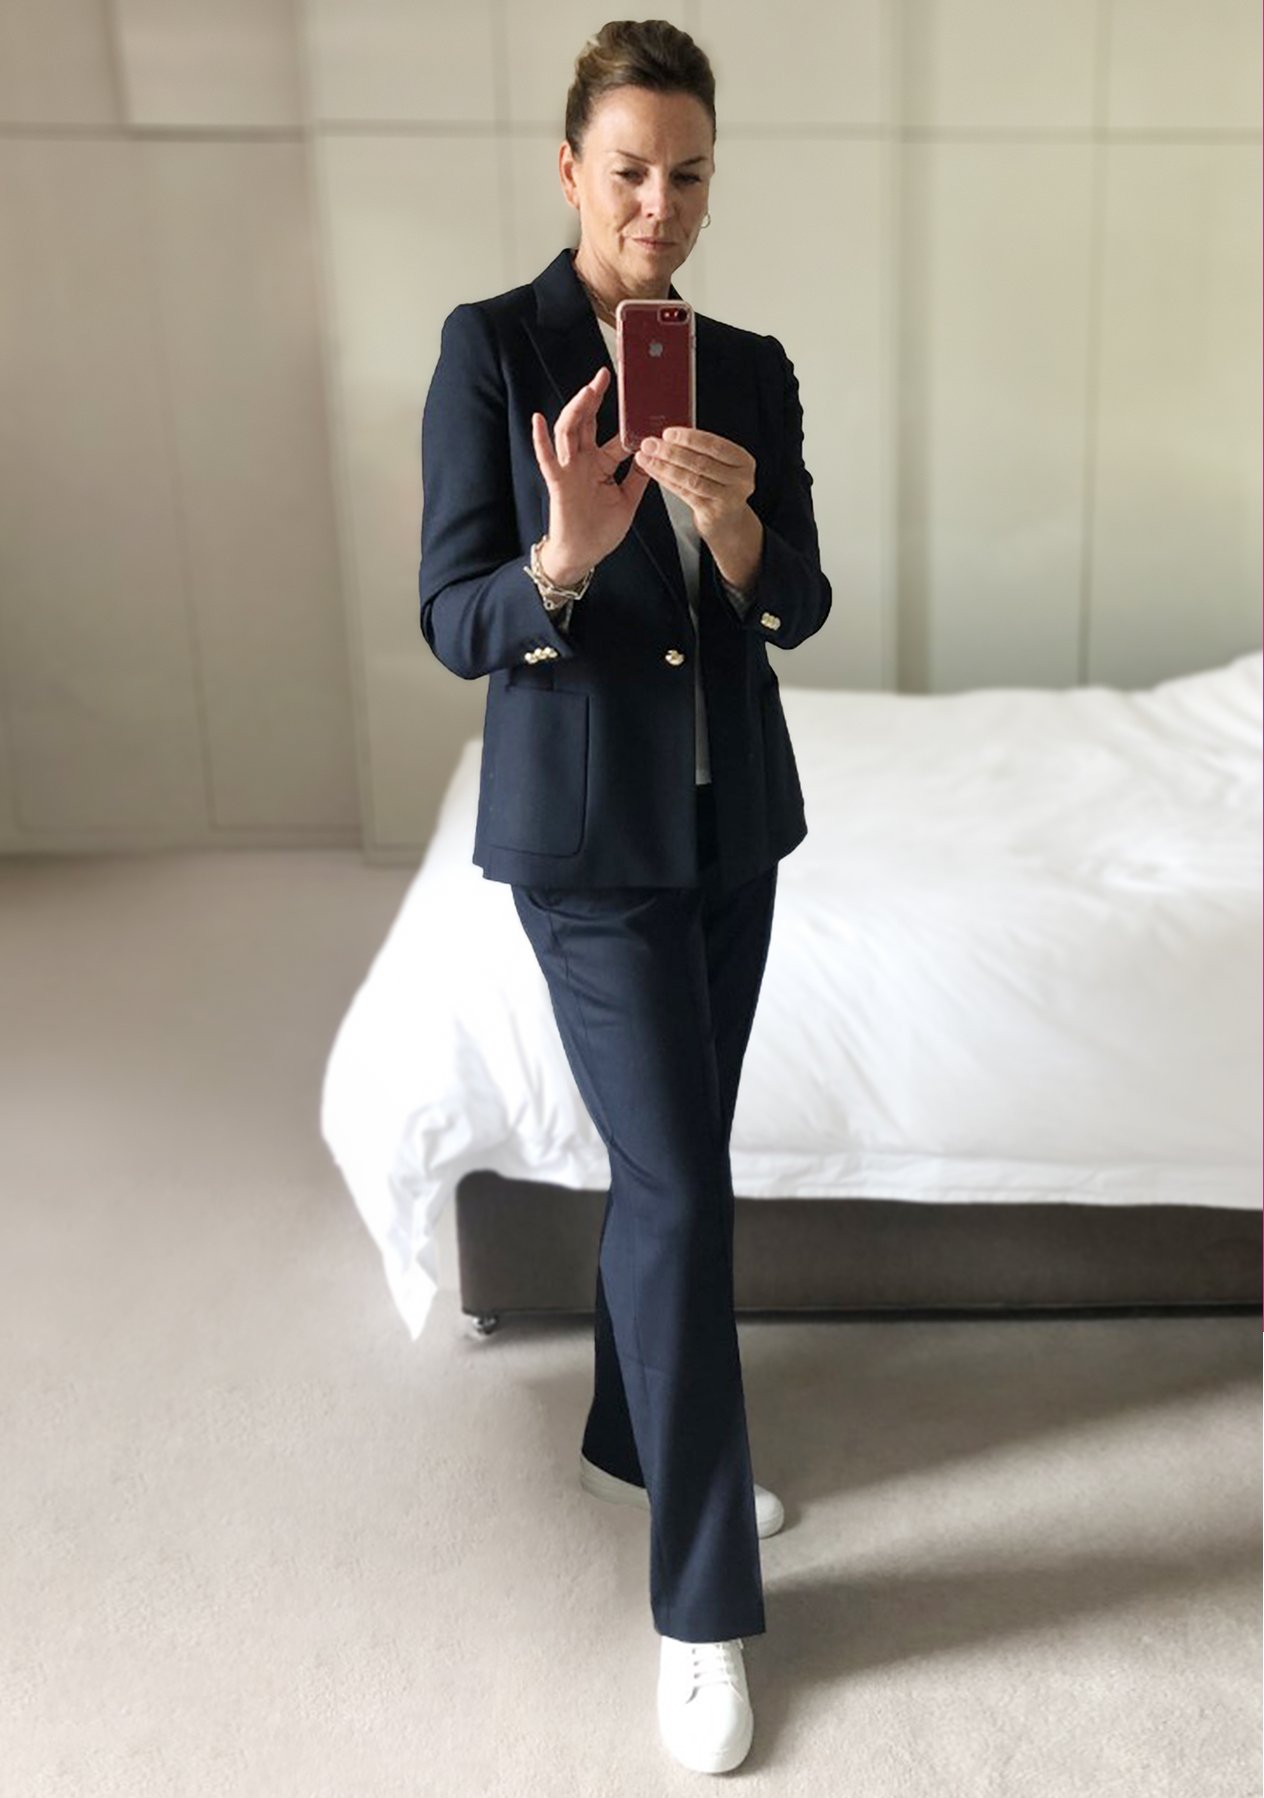 Hobbs Product Director, shows us how to make the most of your wardrobe using versatile staples from your workwear wardrobe. Here, in a classic navy blue Hobbs trouser suit.